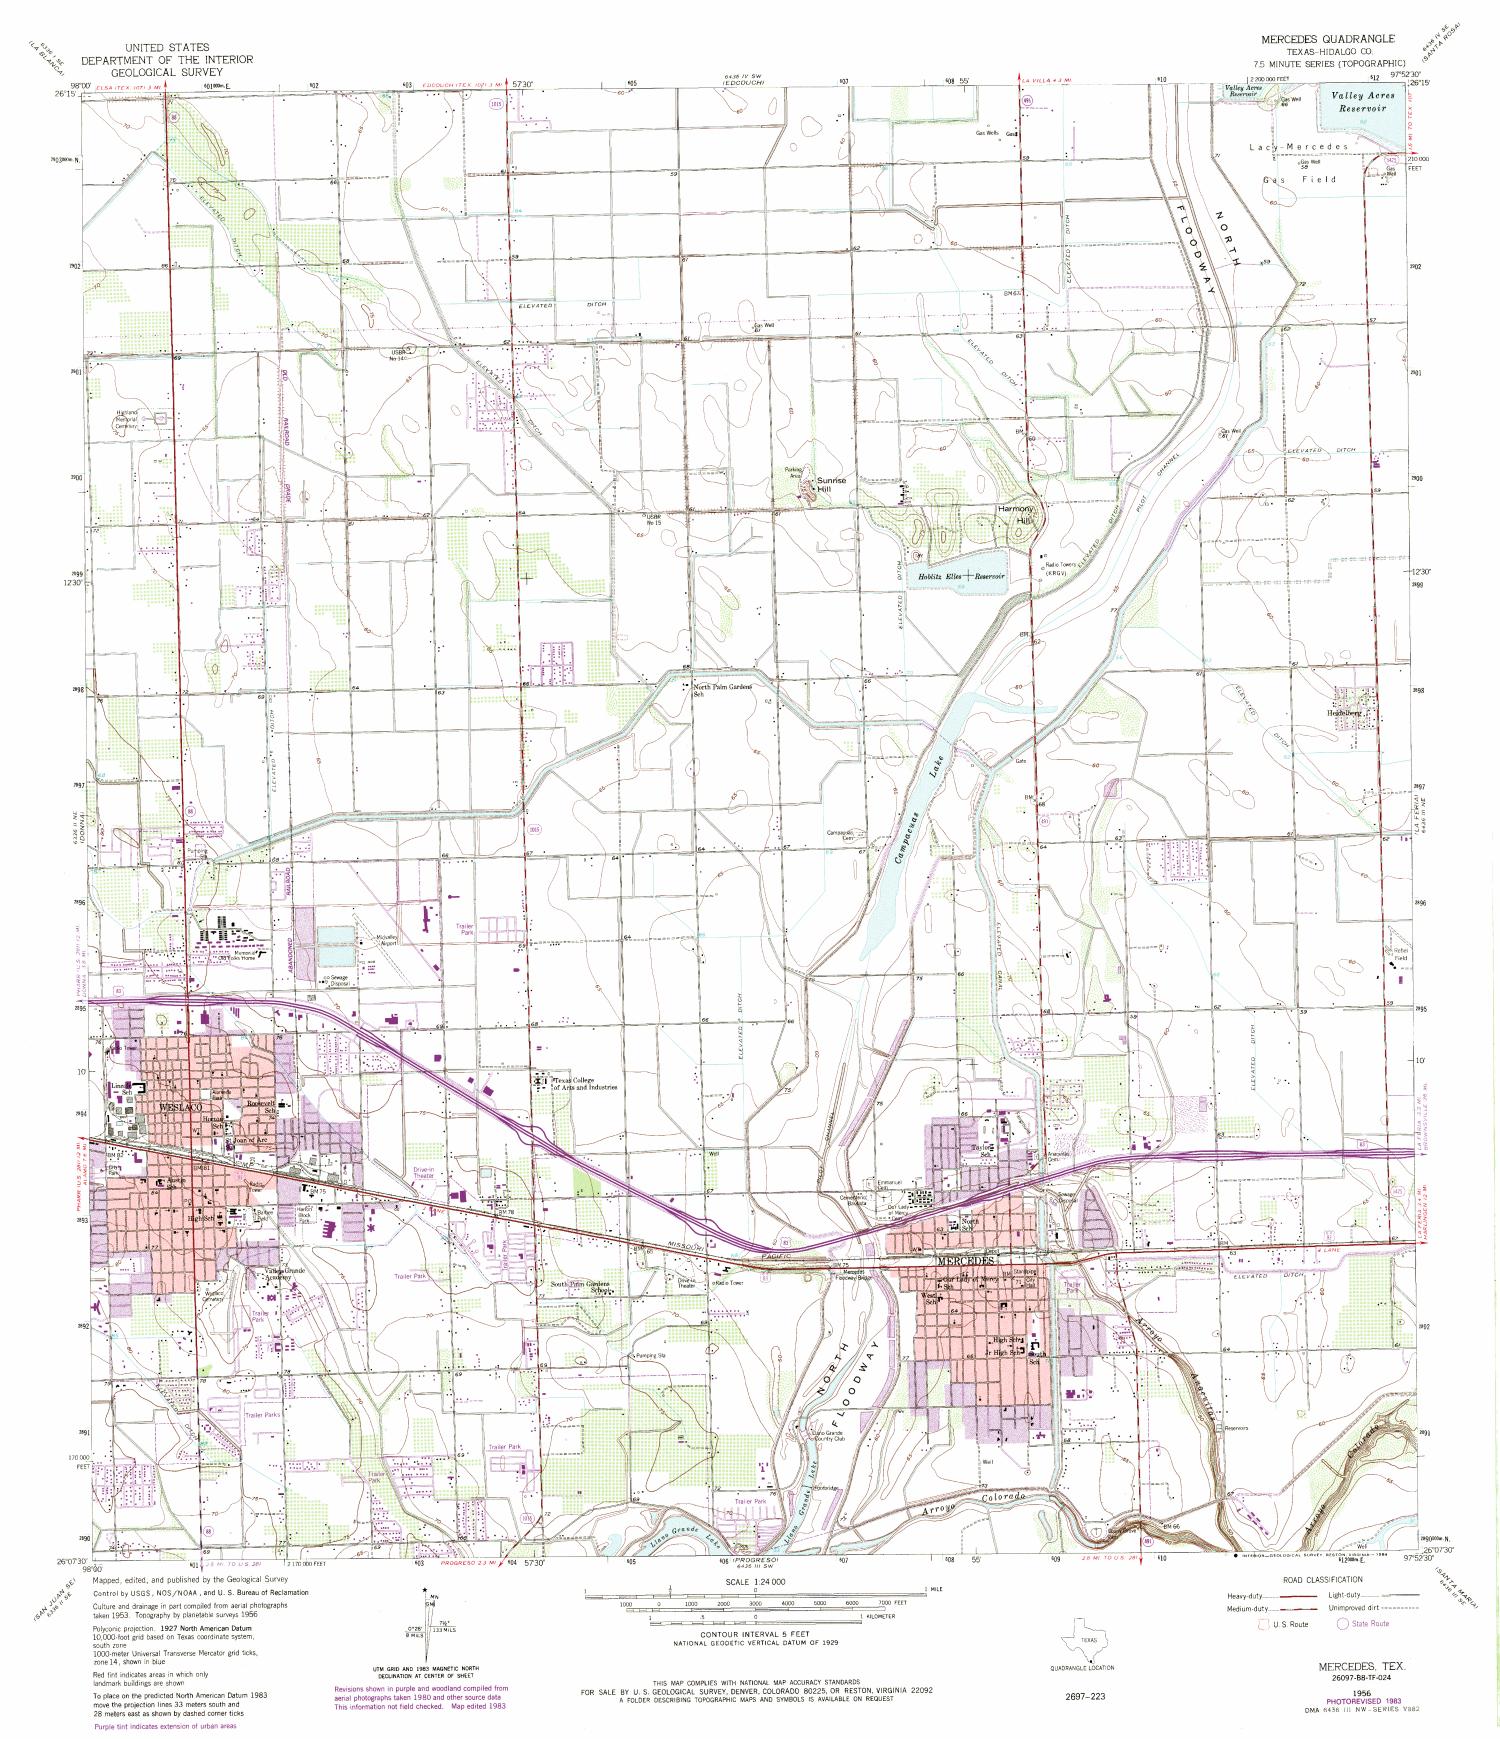 Mercedes Quadrangle, Topographic map of a portion of Texas from the United States Geological Survey (USGS) project. The map includes towns, historic or notable sites, bodies of water, and other geologic features. Scale 1:24,000, 